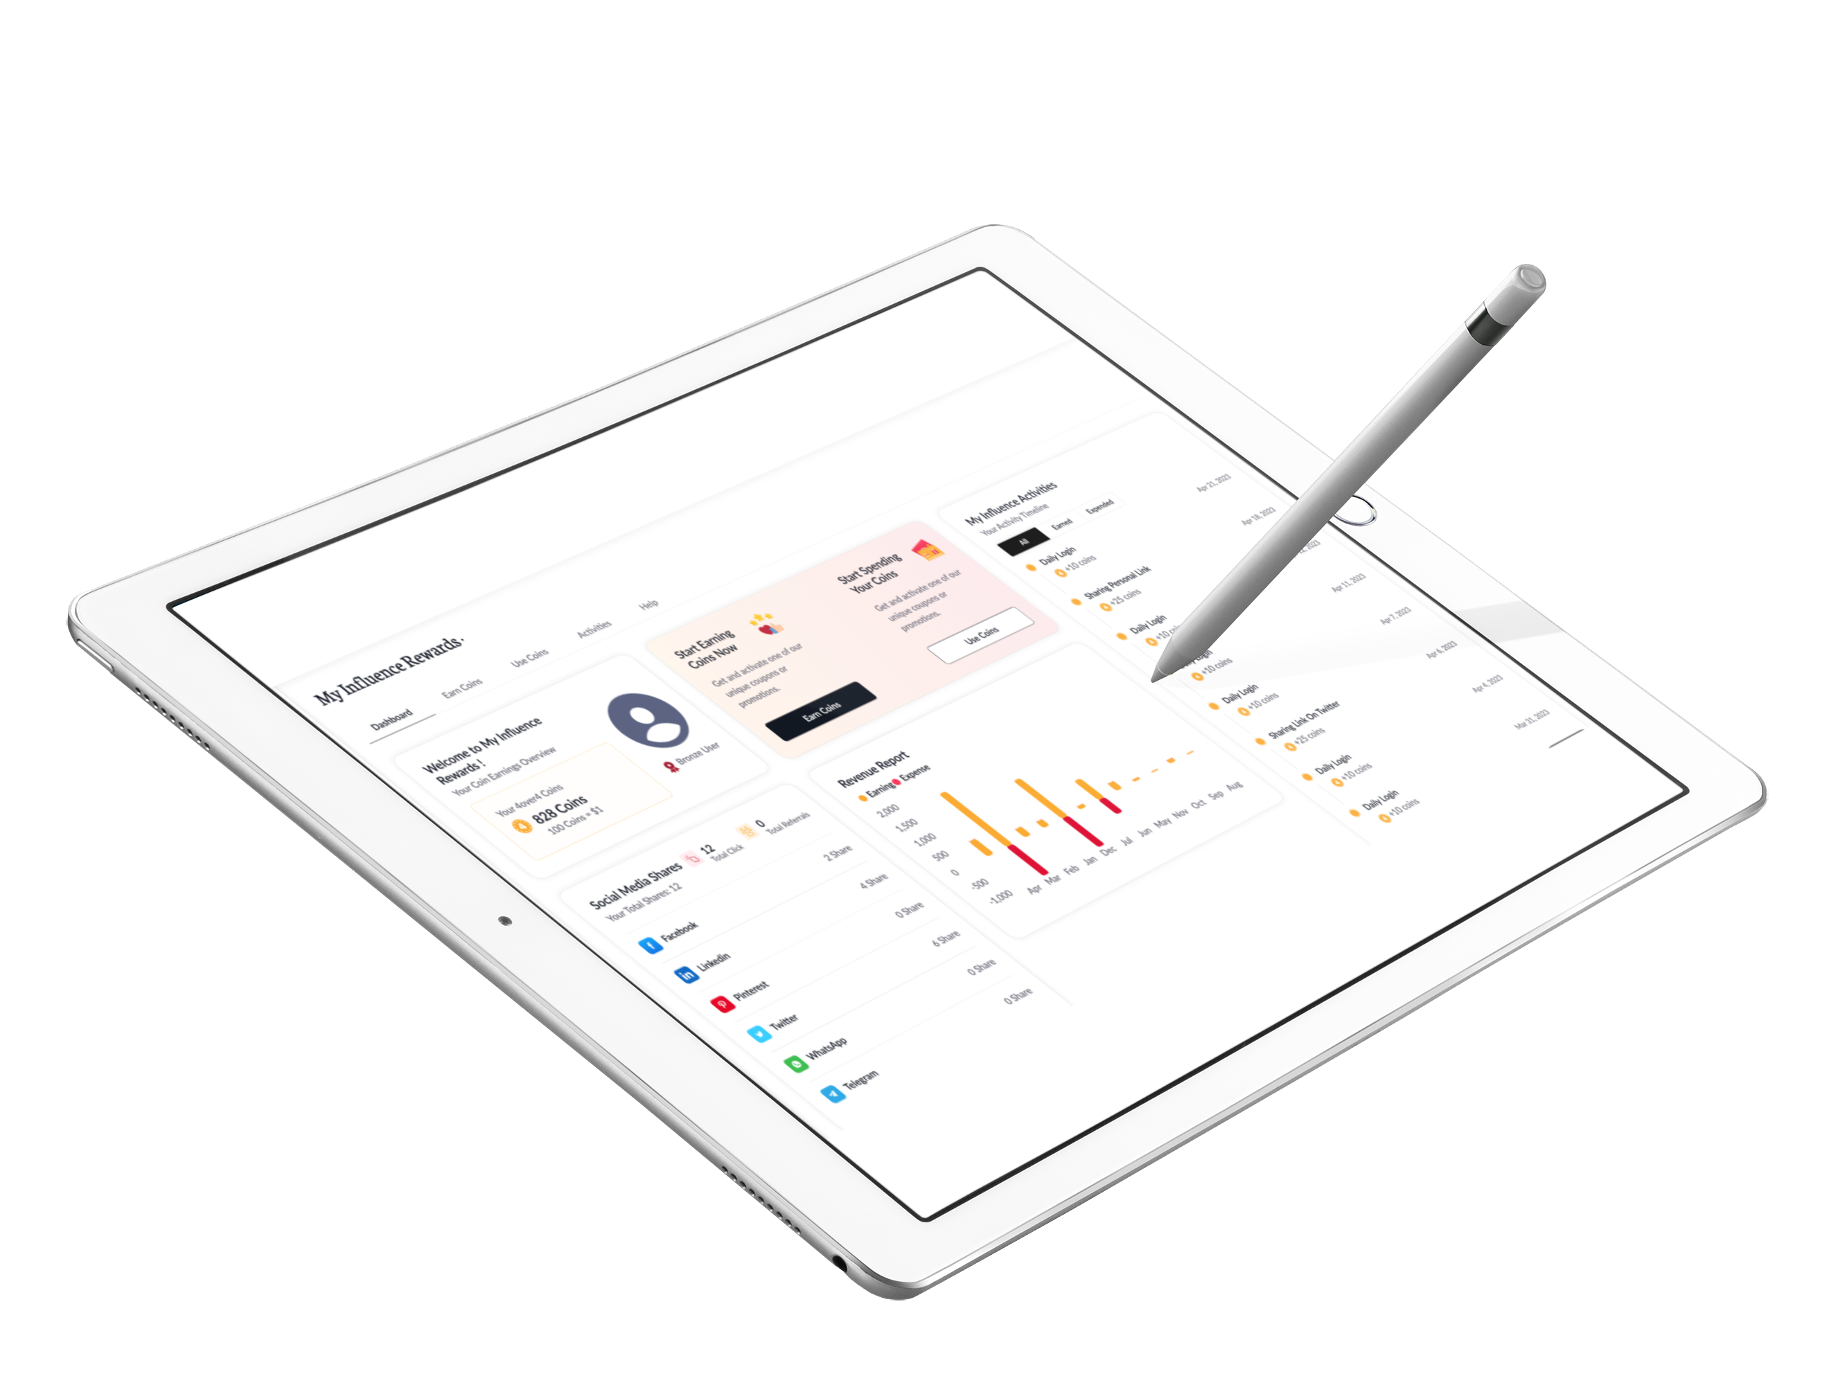 Ipad pro mockup in landscape position with apple pencil a12179